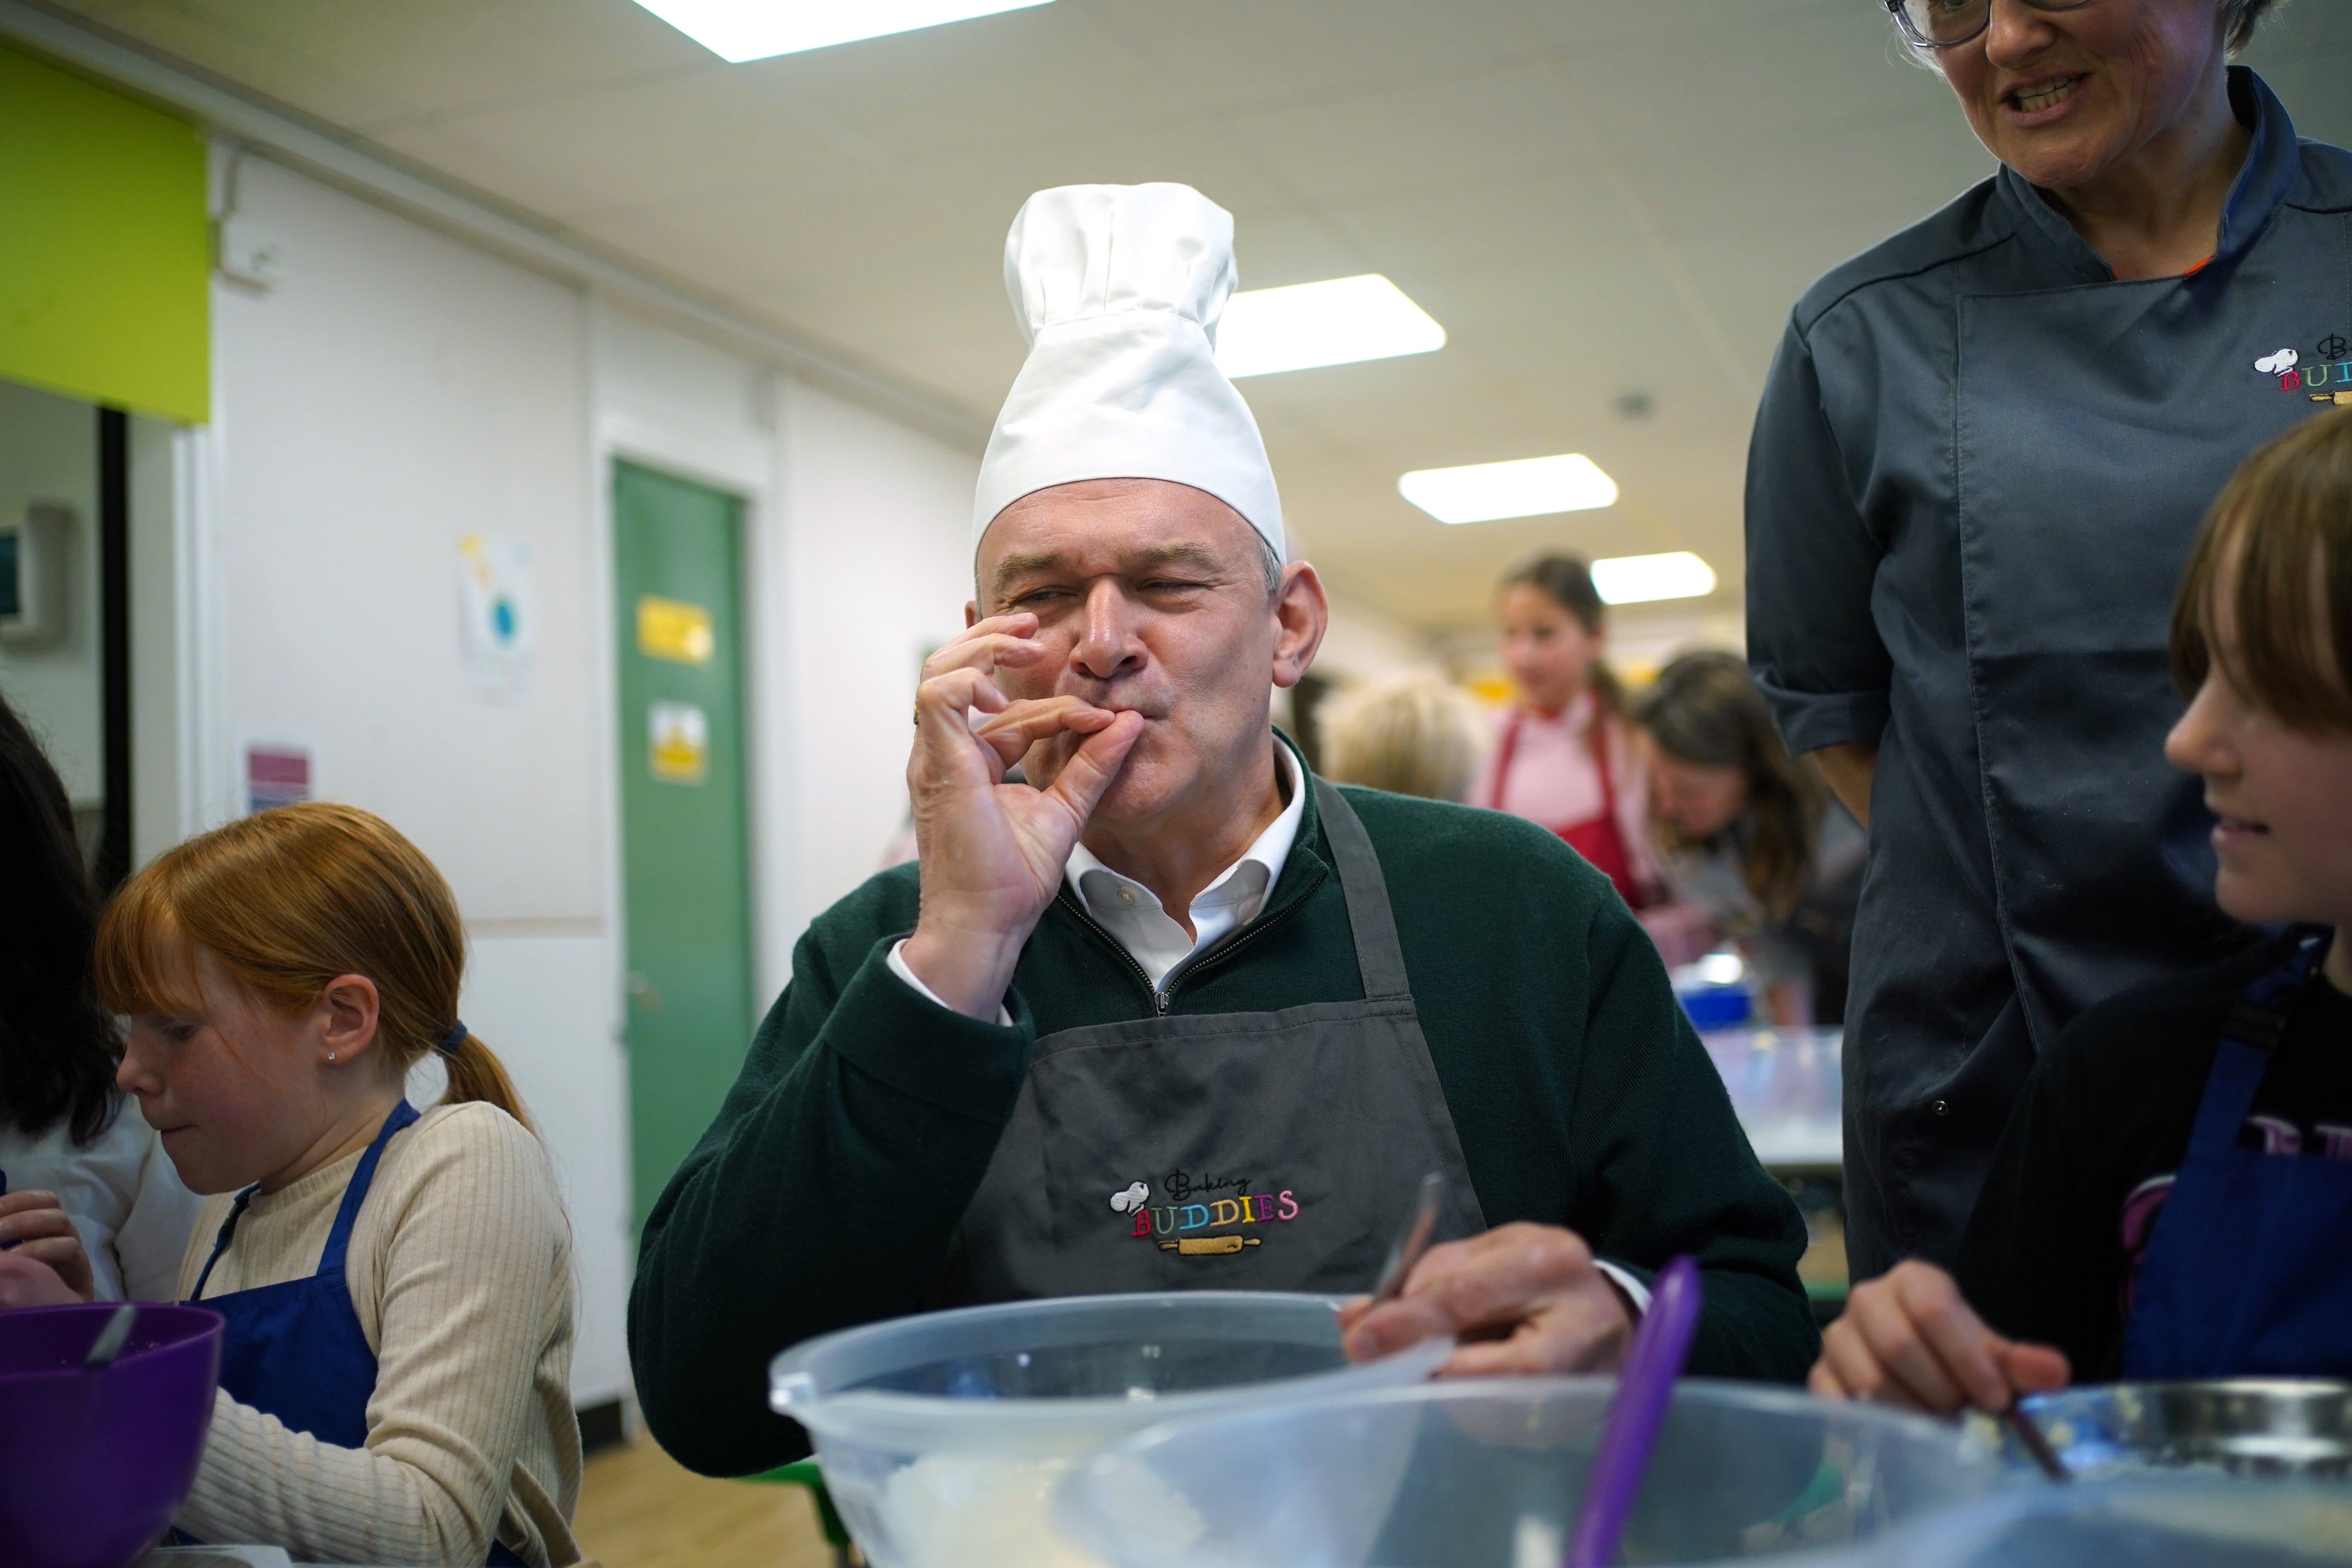 Liberal Democrats leader Sir Ed Davey taking part in a baking lesson with students from High Beeches Primary School during a half-term holiday camp in Hertfordshire